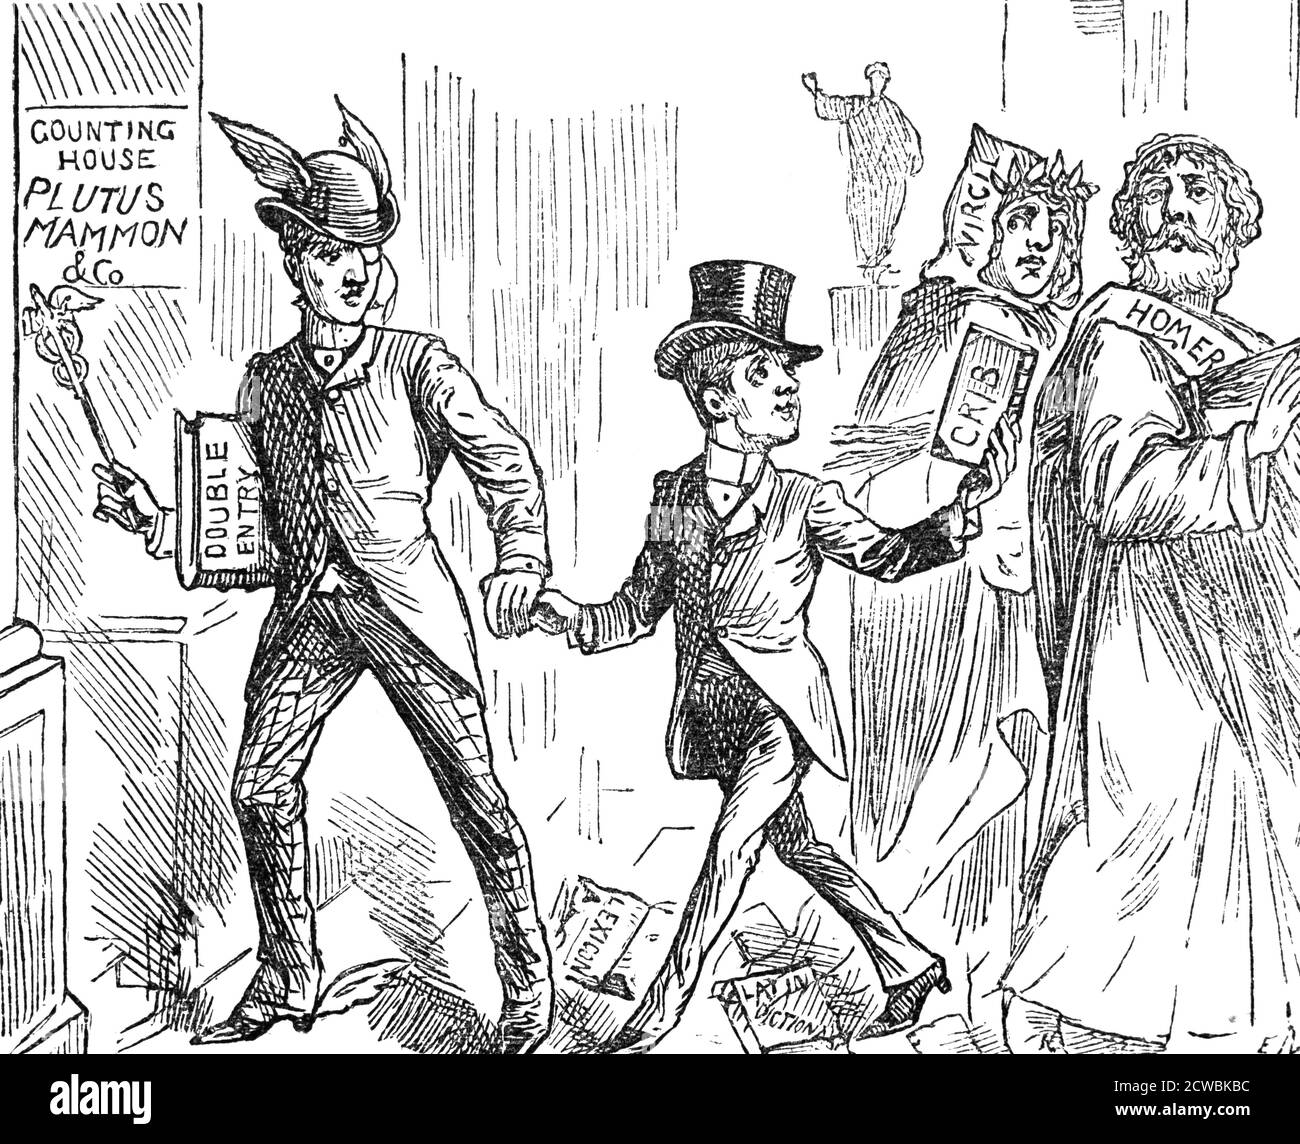 Cartoon titled 'The British educational curse'. Academic and Vocational education are kept separate. Stock Photo